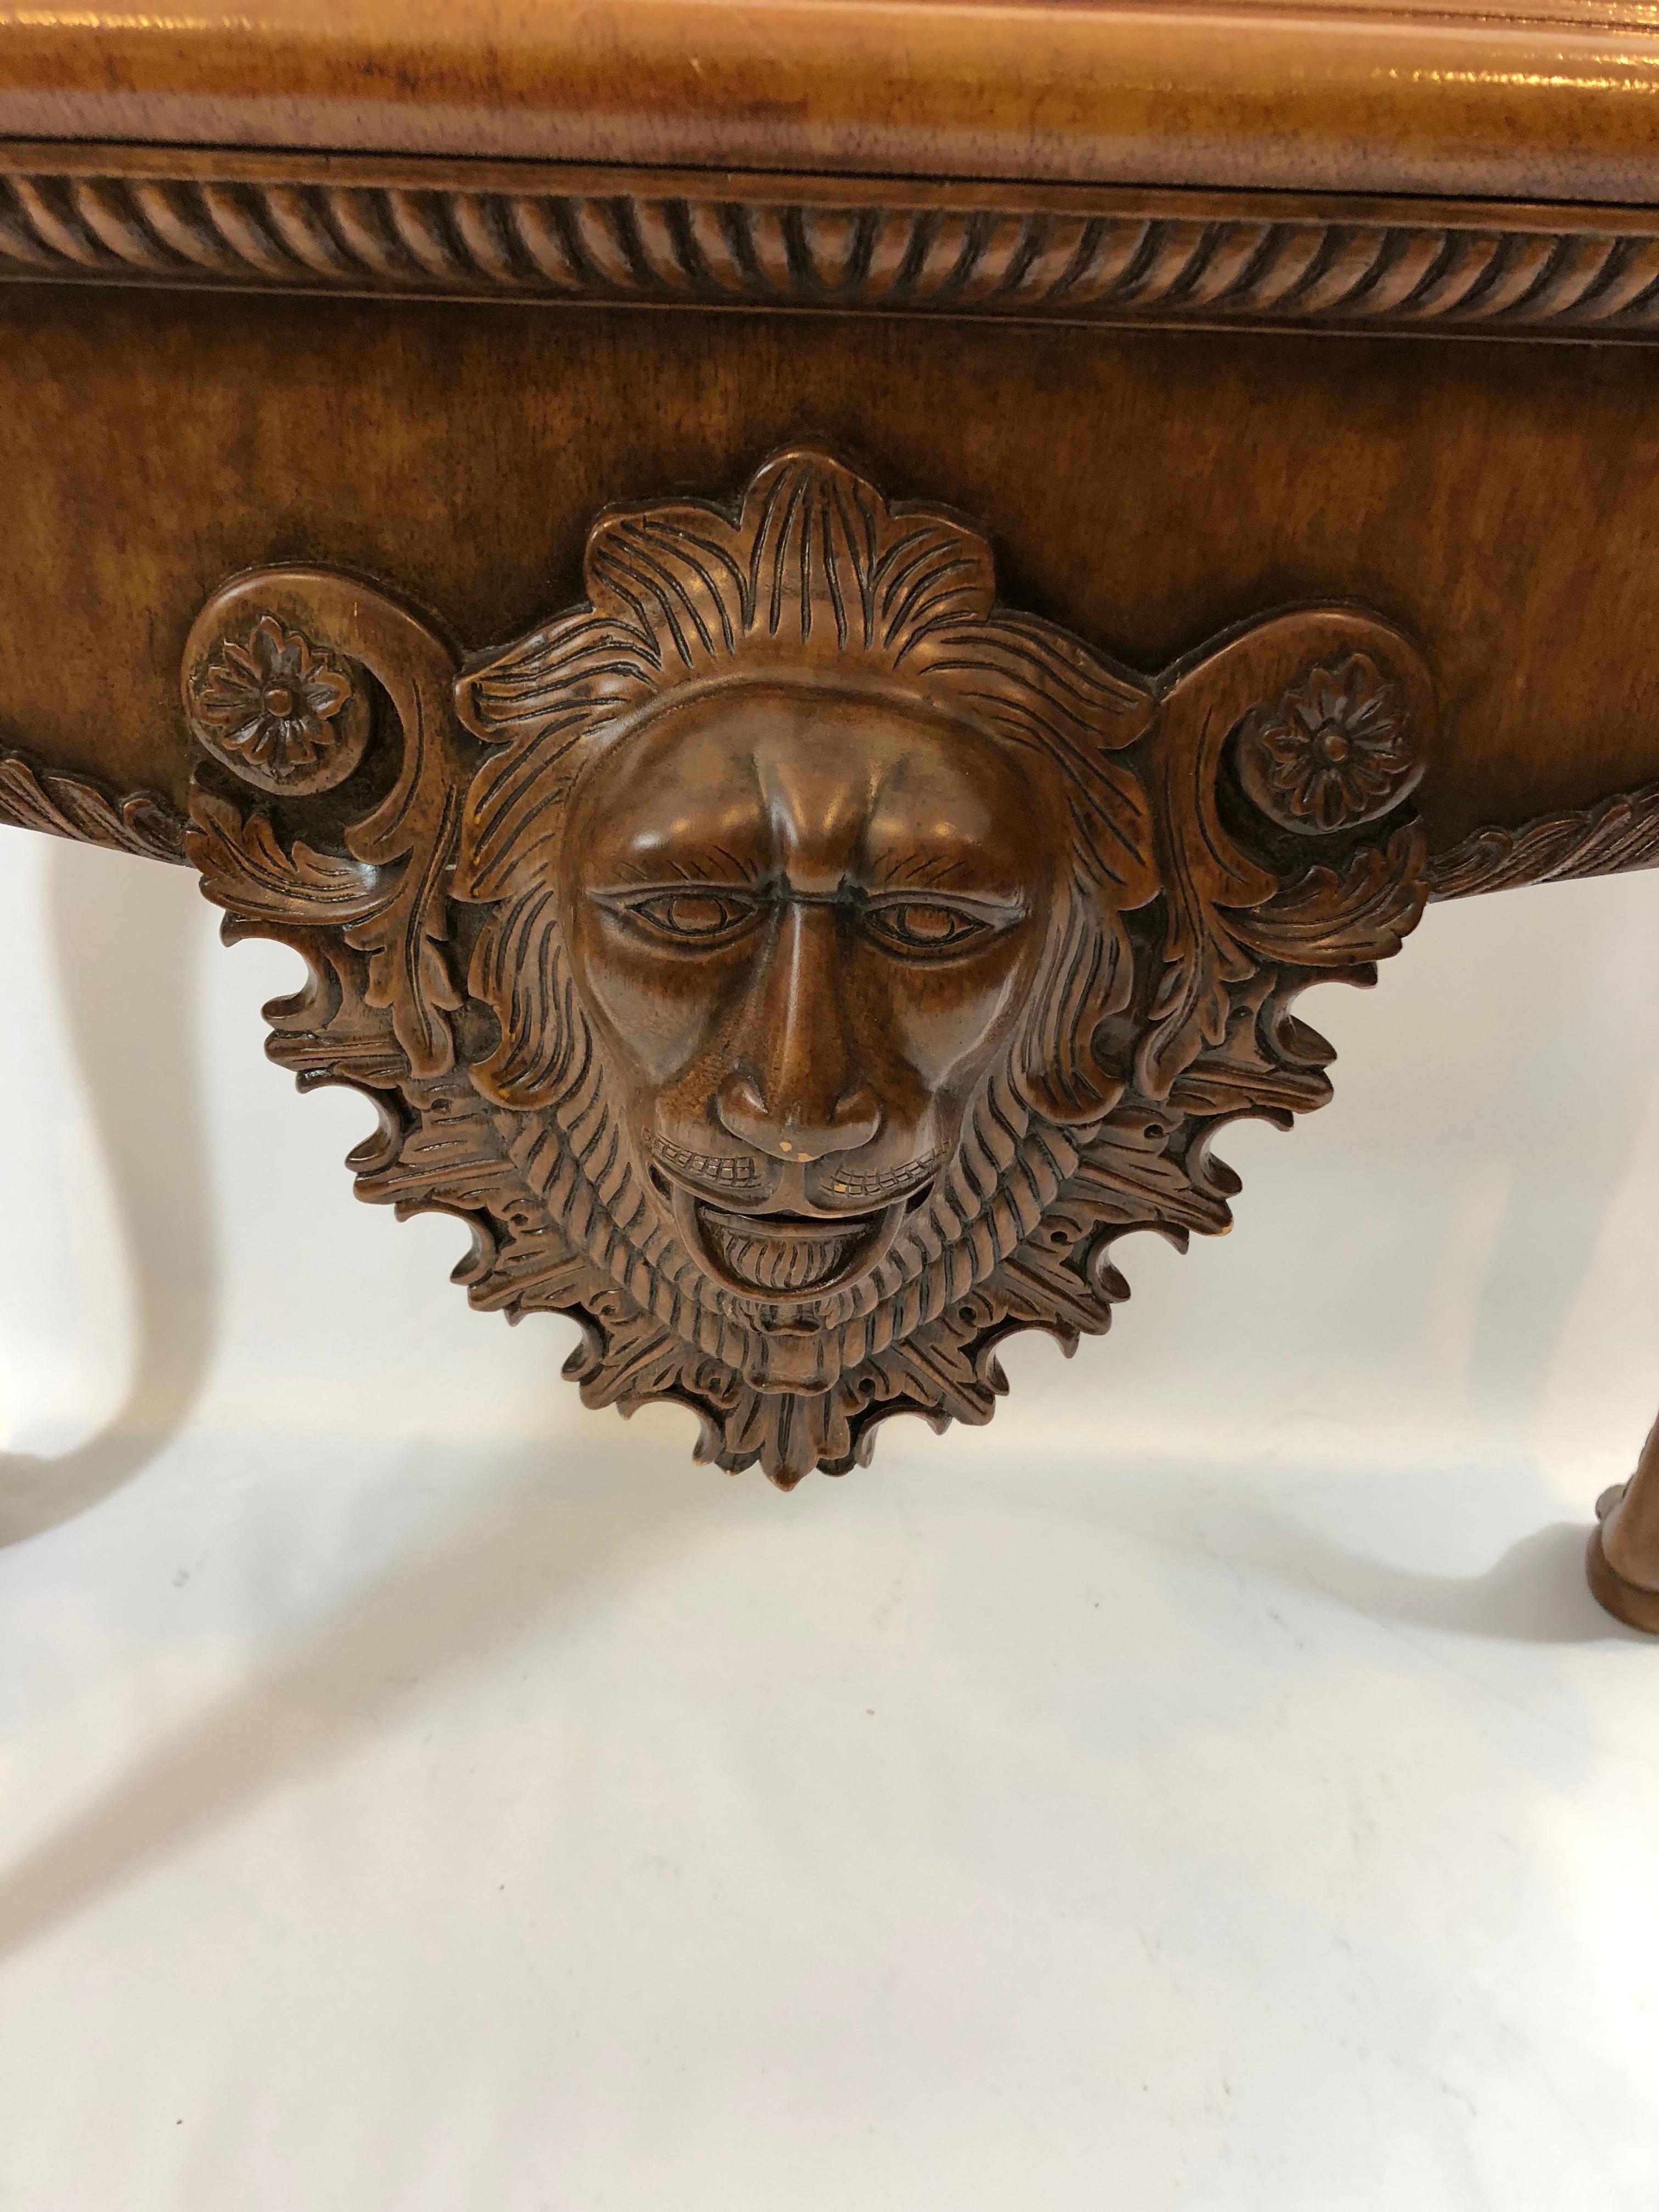 Handsomely designed rich looking console table by Maitland Smith having wonderful carved lions on the front and top of the cabriole legs, as well as a gorgeous tooled leather top with gold border and embossed center medallion. Beautiful from every